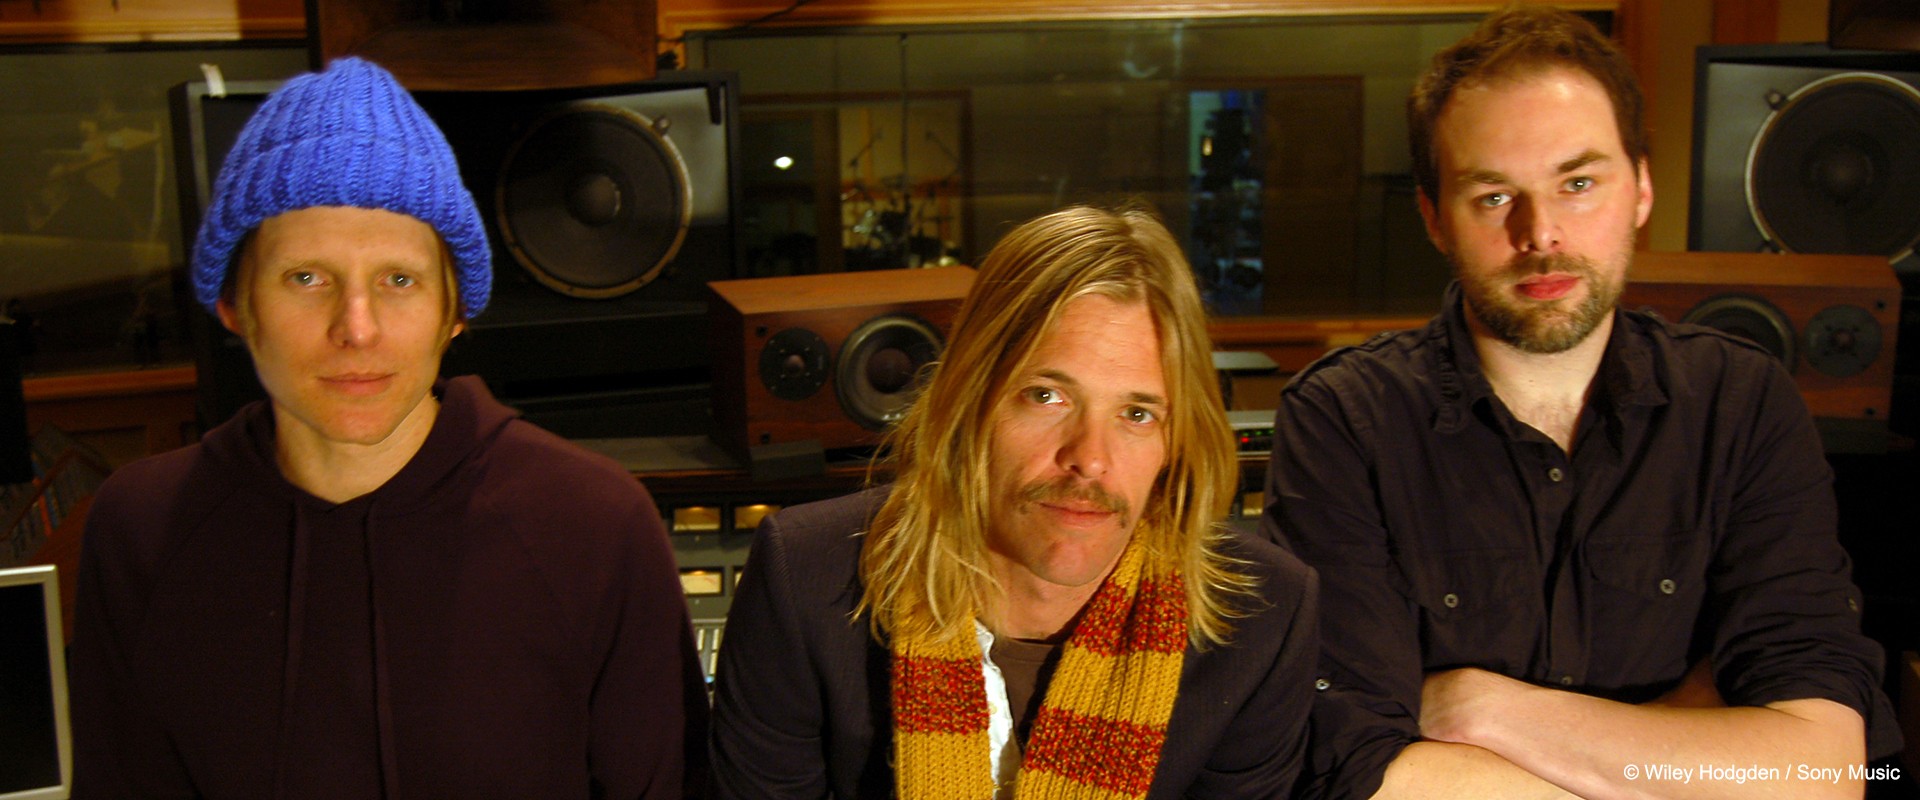 Taylor Hawkins and the Coattail Riders